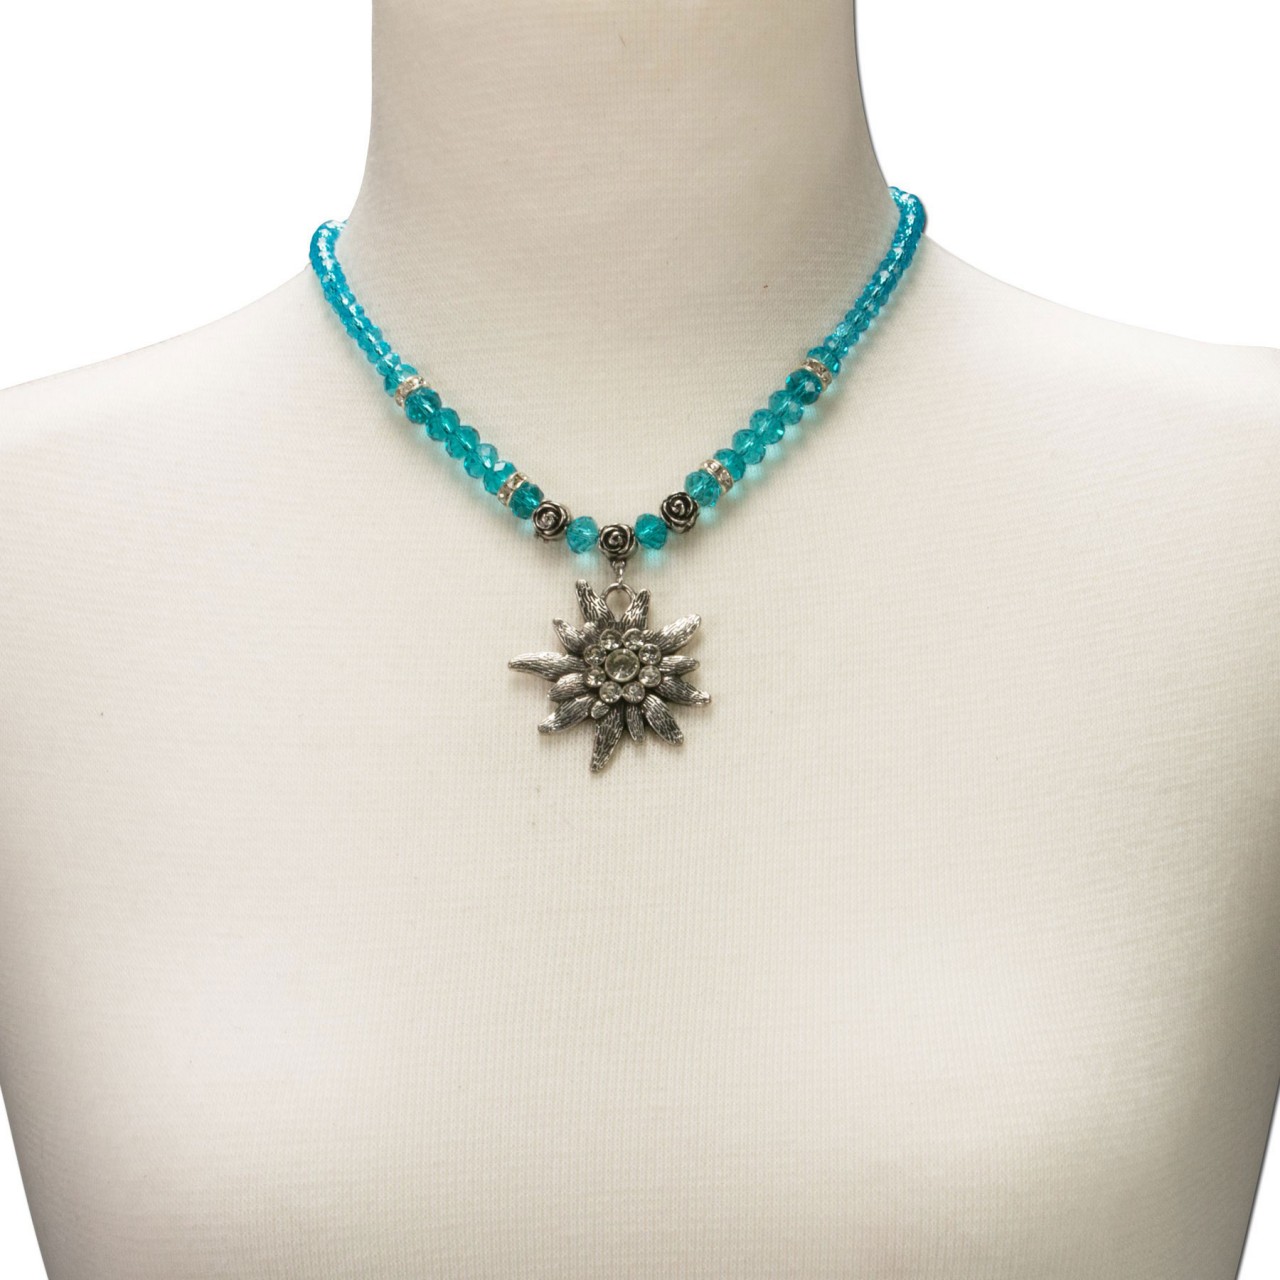 Preview: Traditional Necklace large Edelweiß turquoise